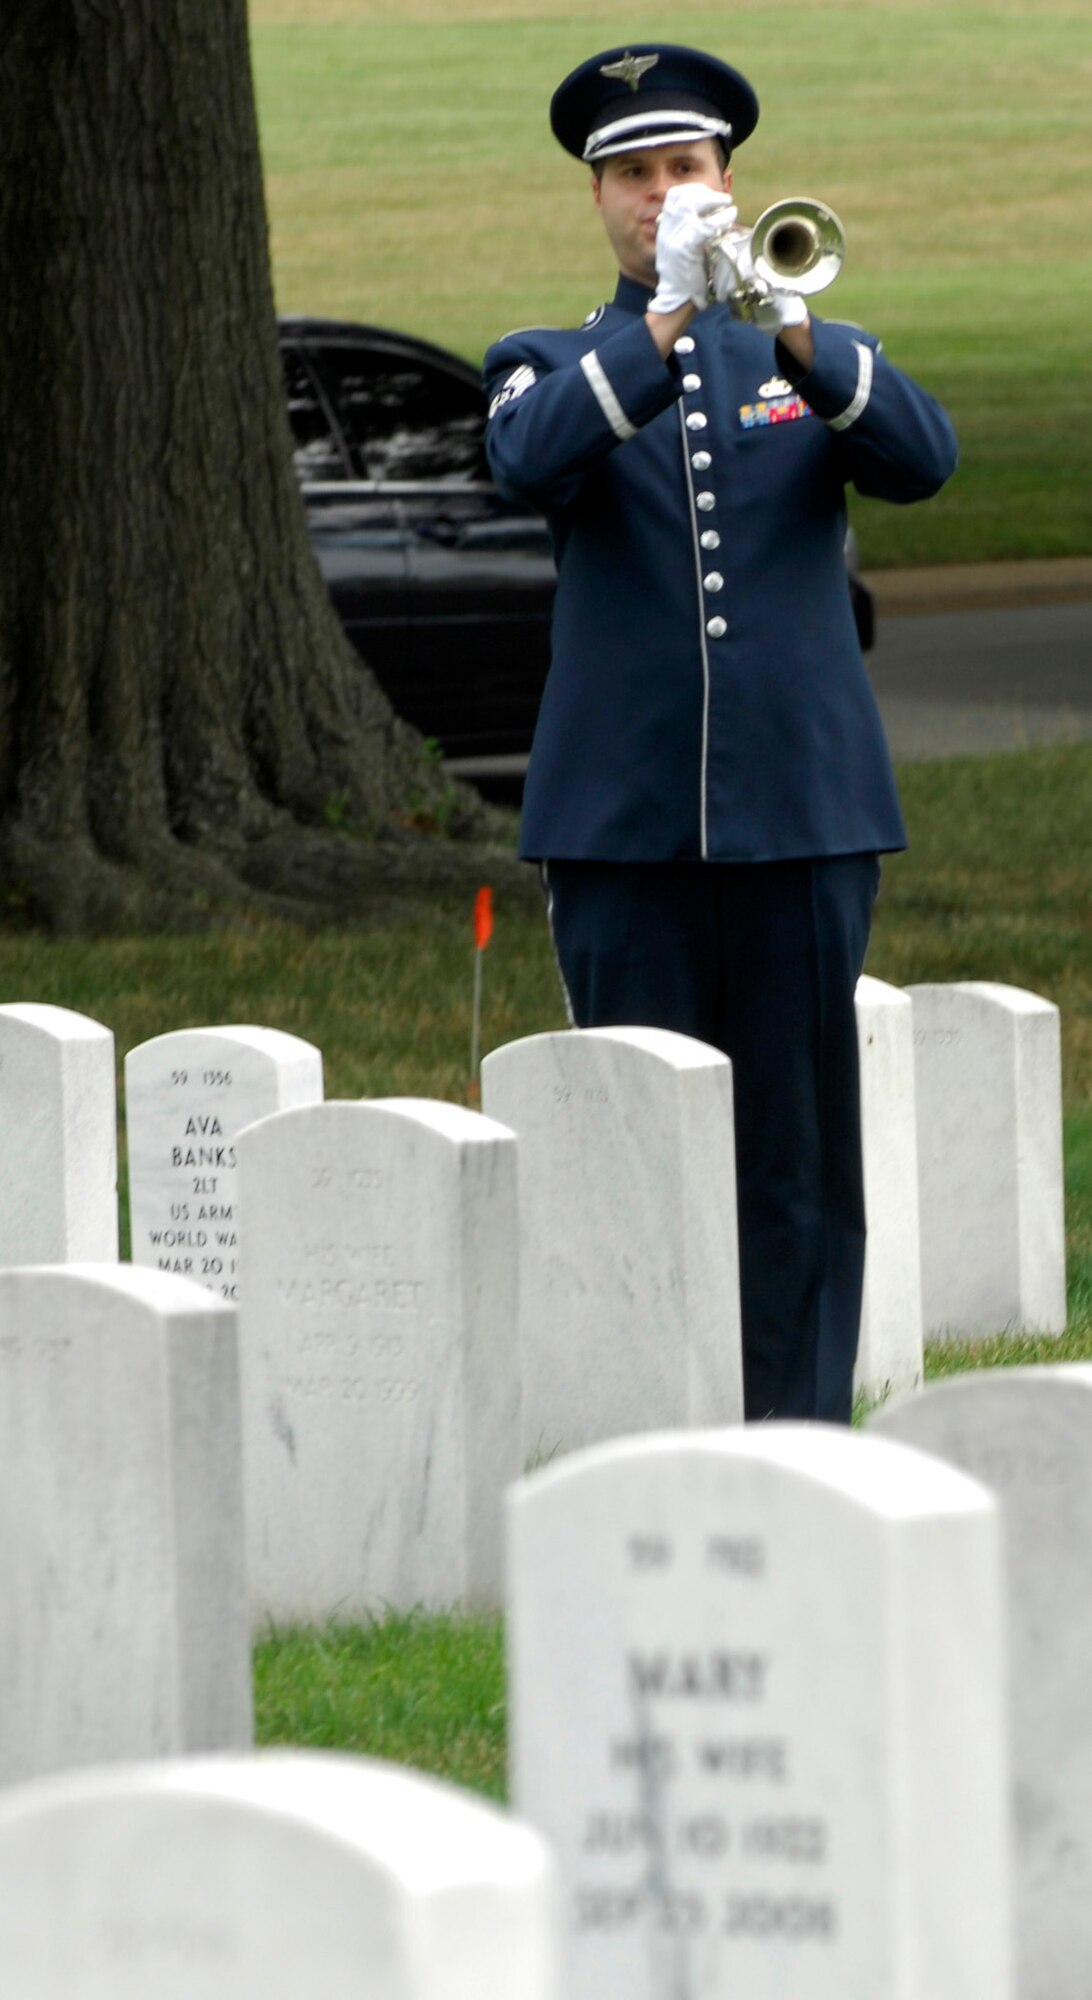 Tech. Sgt. Patrick McDermott, of the  U.S. Air Force Band, plays "Taps" during a remembrance ceremony June 25, 2011, at Arlington National Cemetery, Va., to mark the 15th anniversary since the Khobar Towers bombing. Nineteen Airmen were killed in the terrorist bombing, June 25, 1996, at Dhahran Air Base, Saudi Arabia. (U.S. Air Force photo/Staff Sgt. Tiffany Trojca)